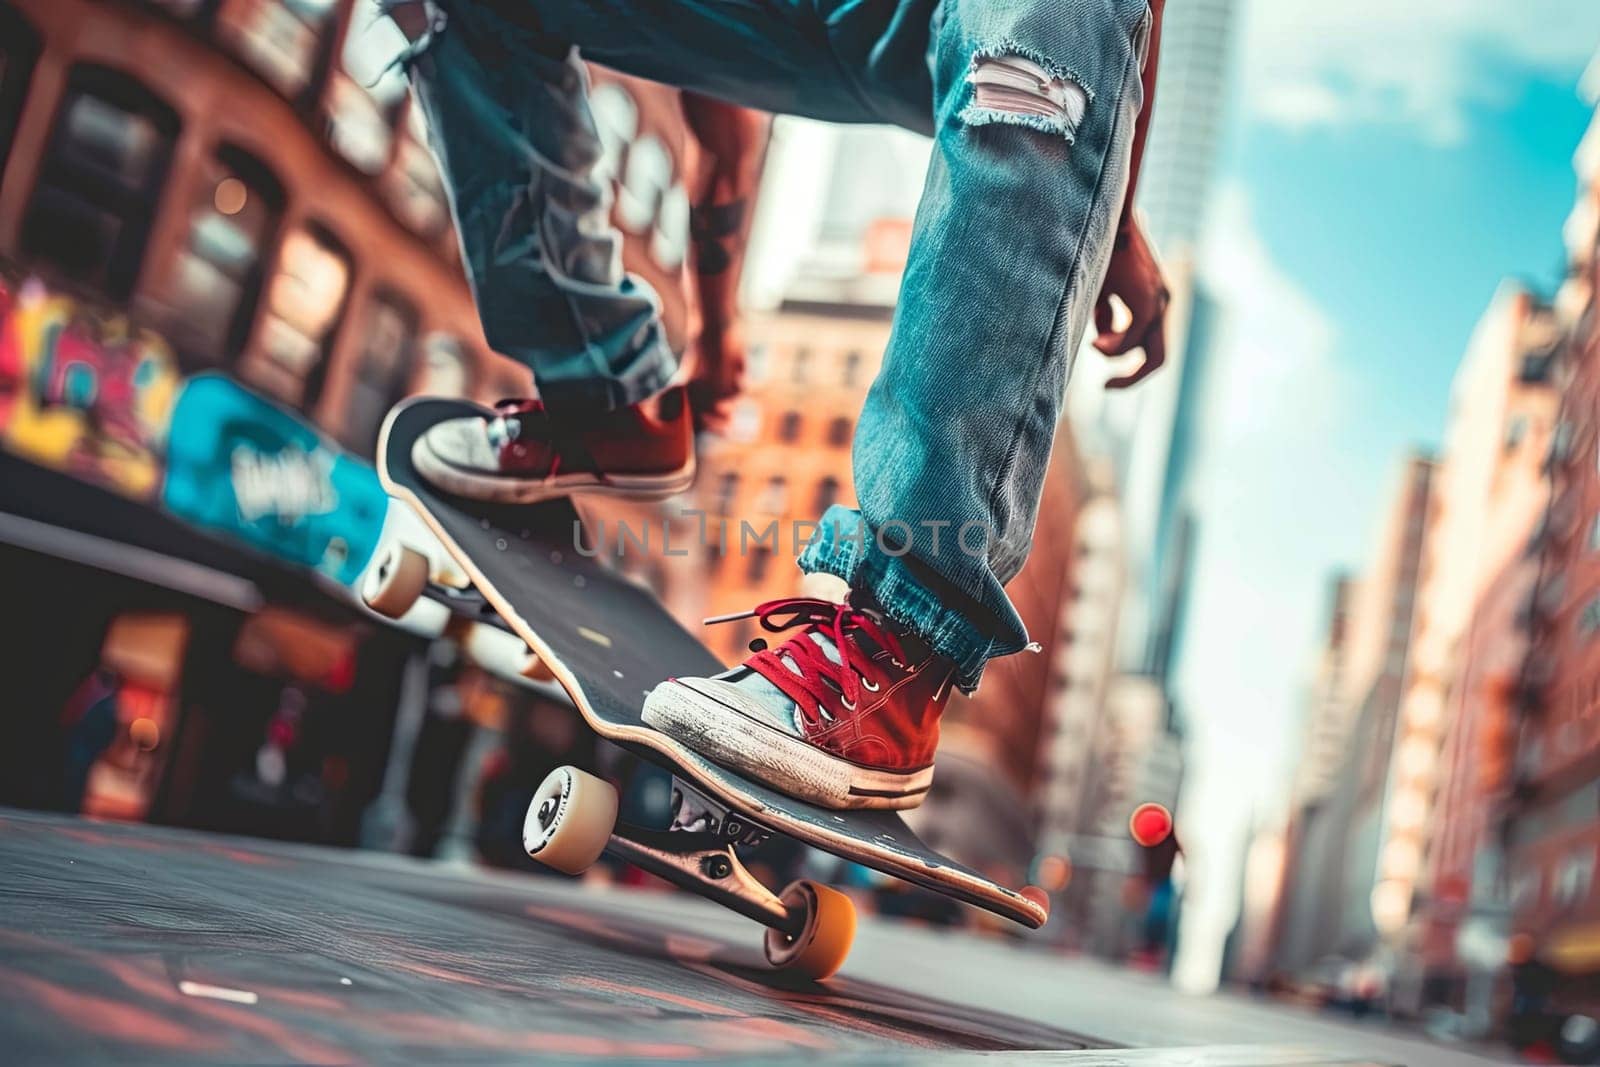 A person skillfully riding a skateboard on a bustling urban street, showcasing agility and balance.